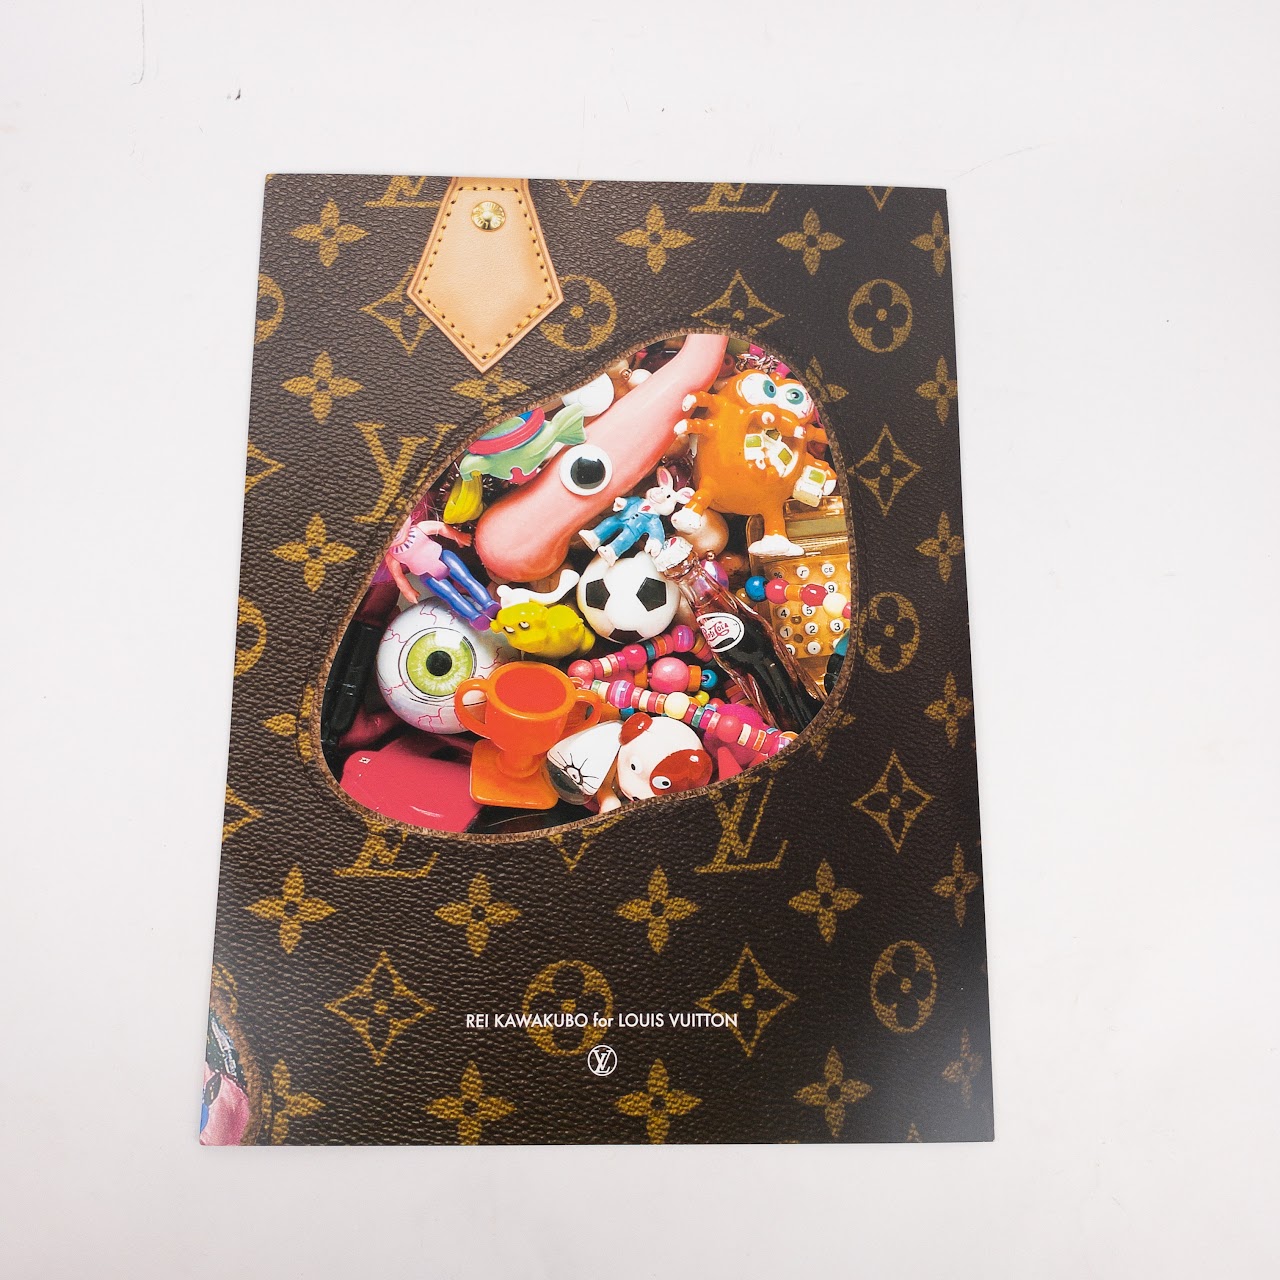 mar on X: Louis Vuitton's Celebrating Monogram collaboration with Rei  Kawakubo, Karl Lagerfeld, Frank Gehry, Cindy Sherman, Marc Newson, and Christian  Louboutin. LV invited the 6 iconic artists to re-interpret the LV